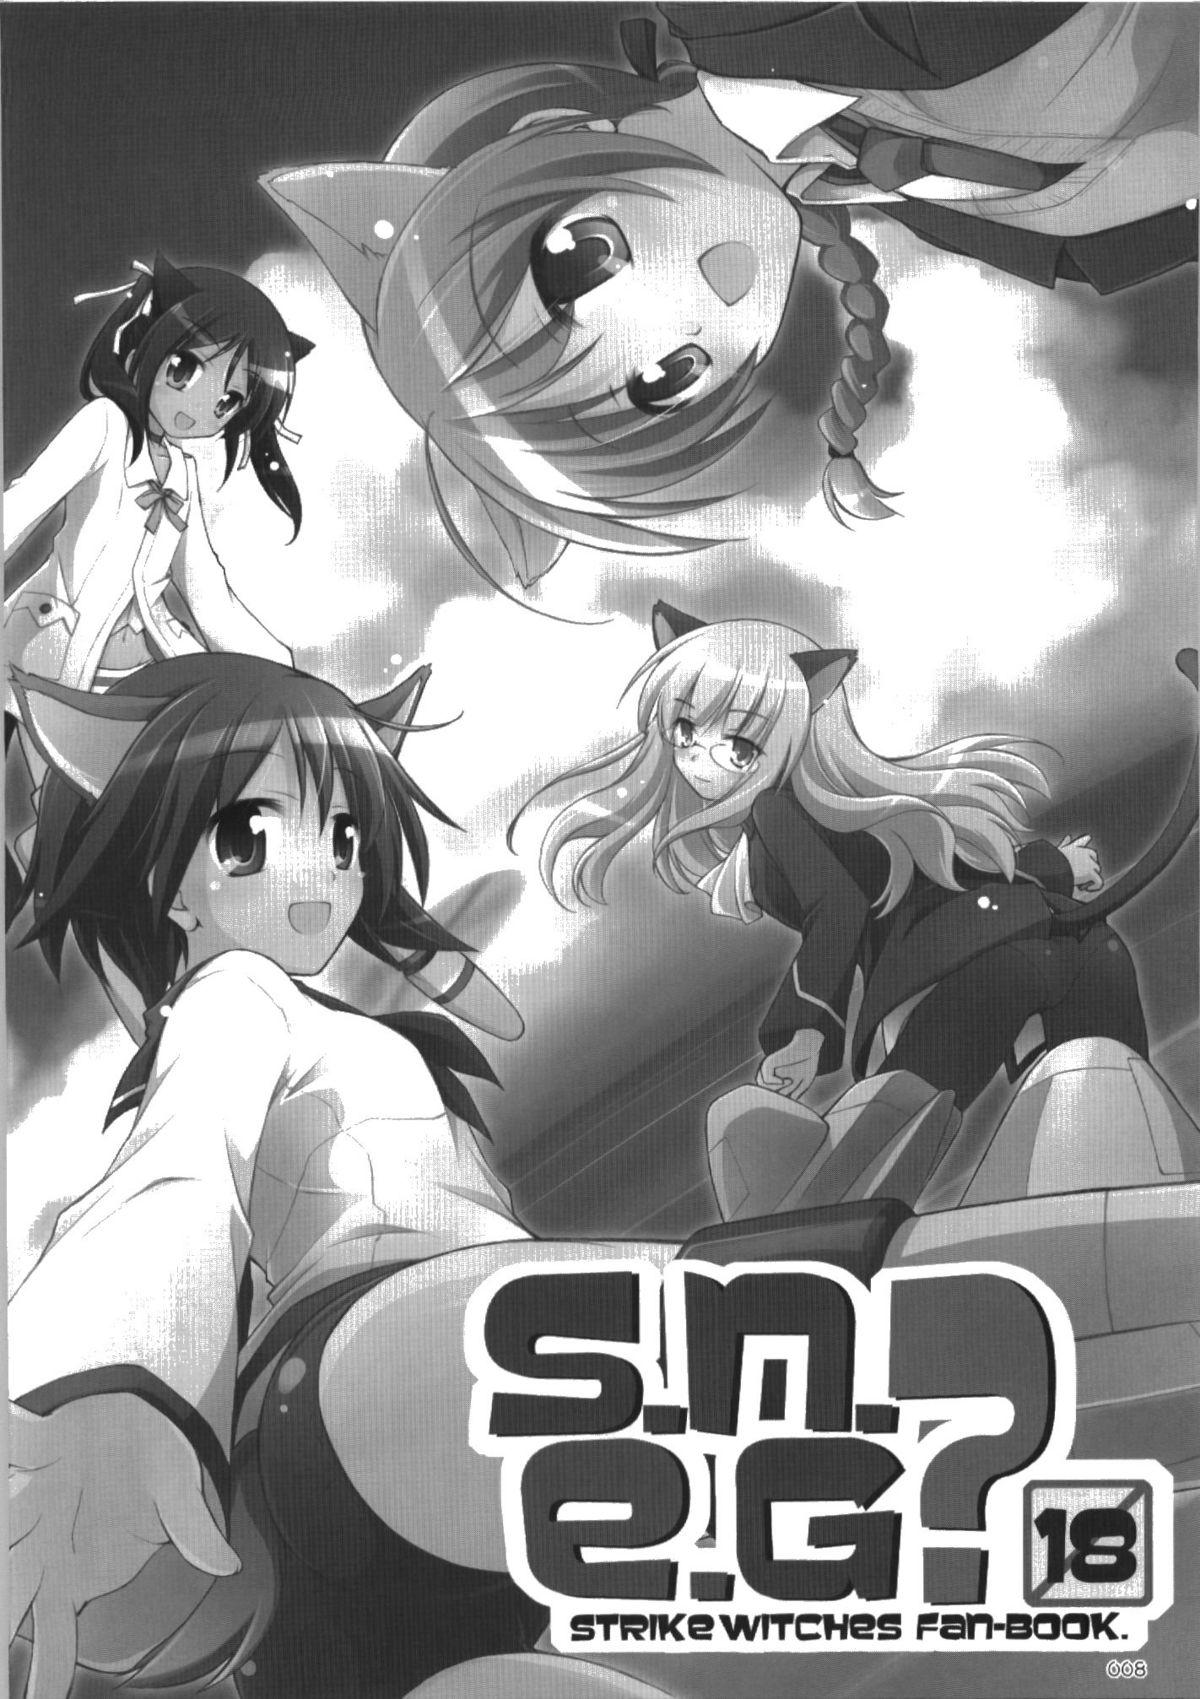 Cdmx s.n.e.g? - Strike witches Webcams - Page 8